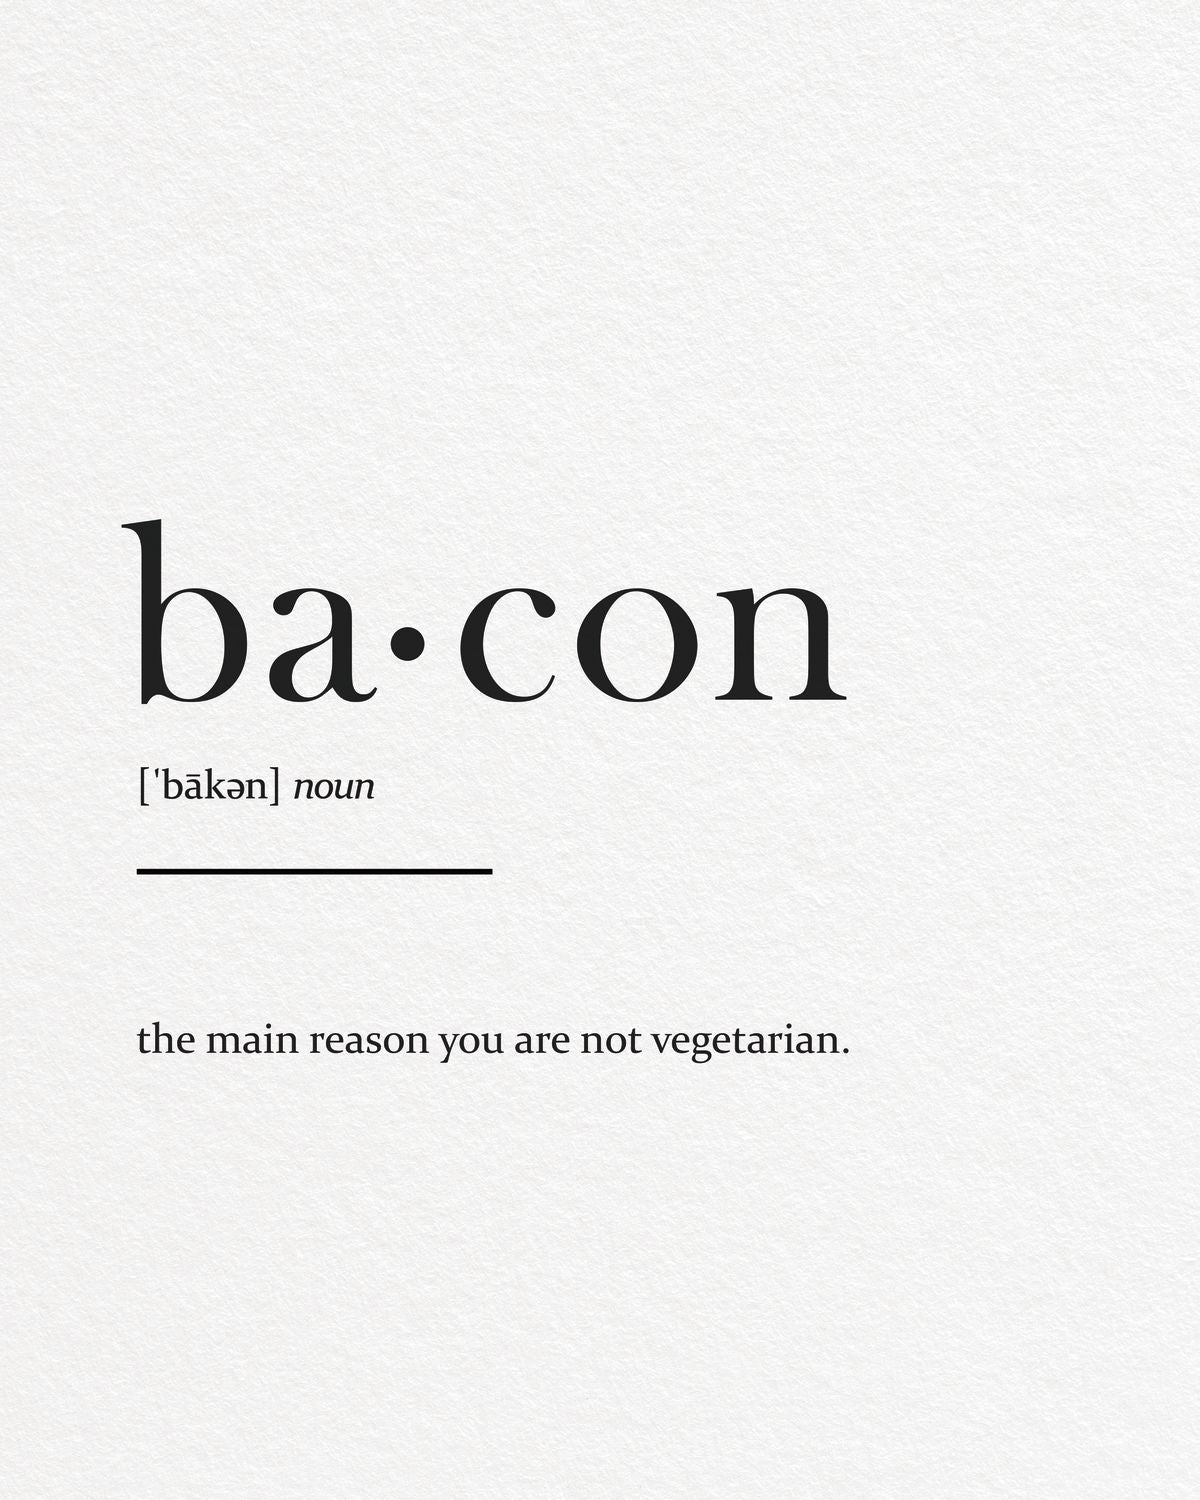 Funny Bacon Definition